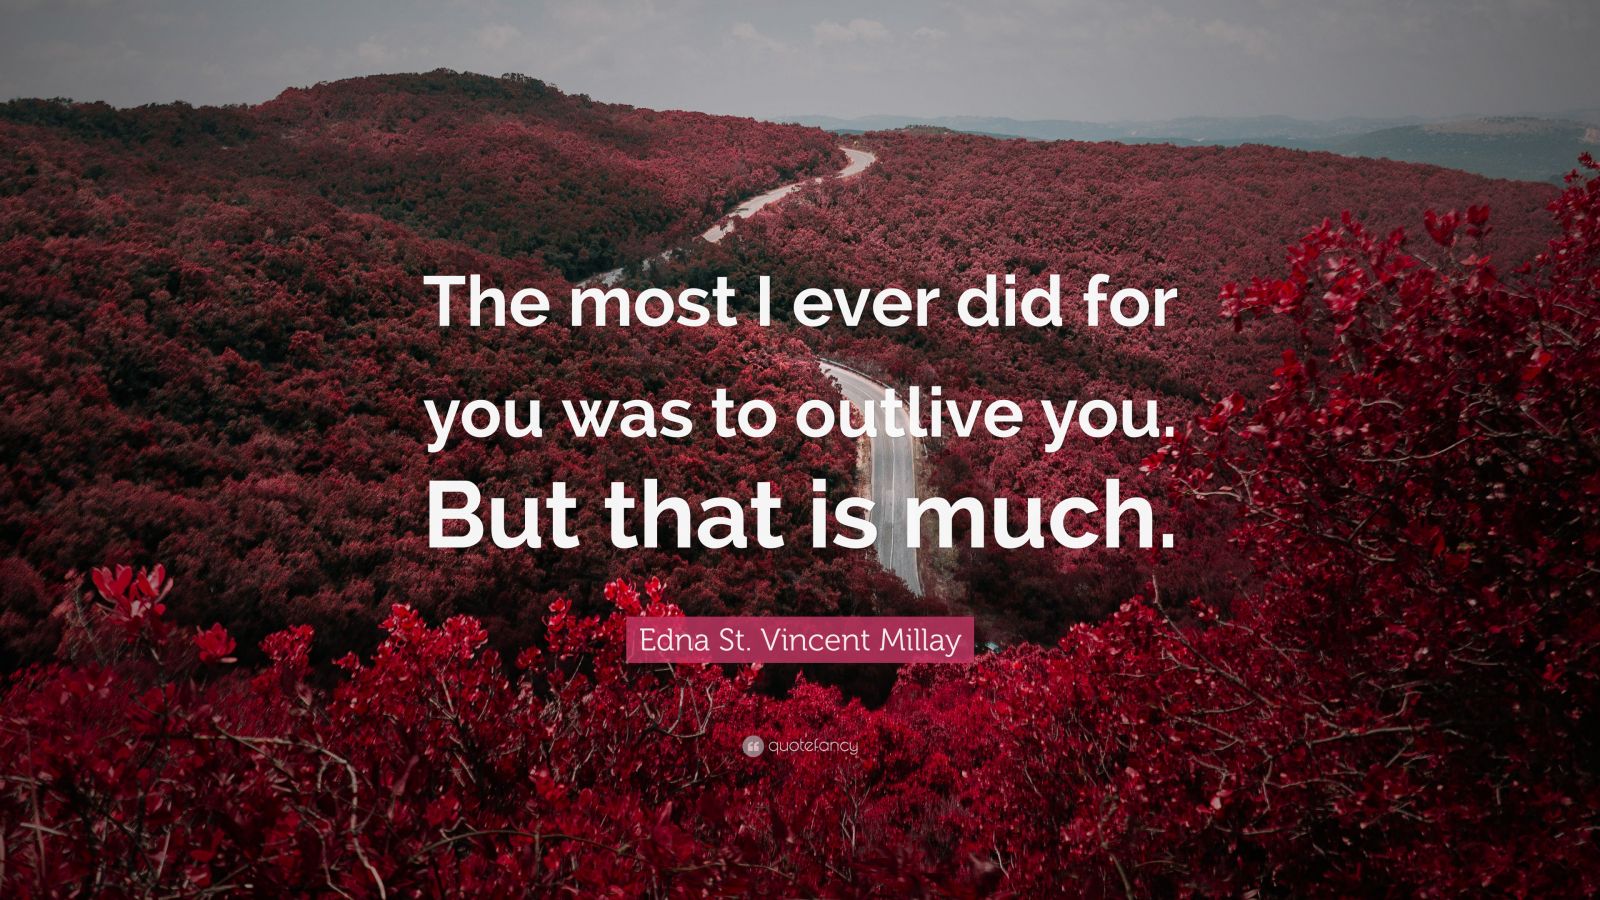 Edna St. Vincent Millay Quote: “The most I ever did for you was to ...